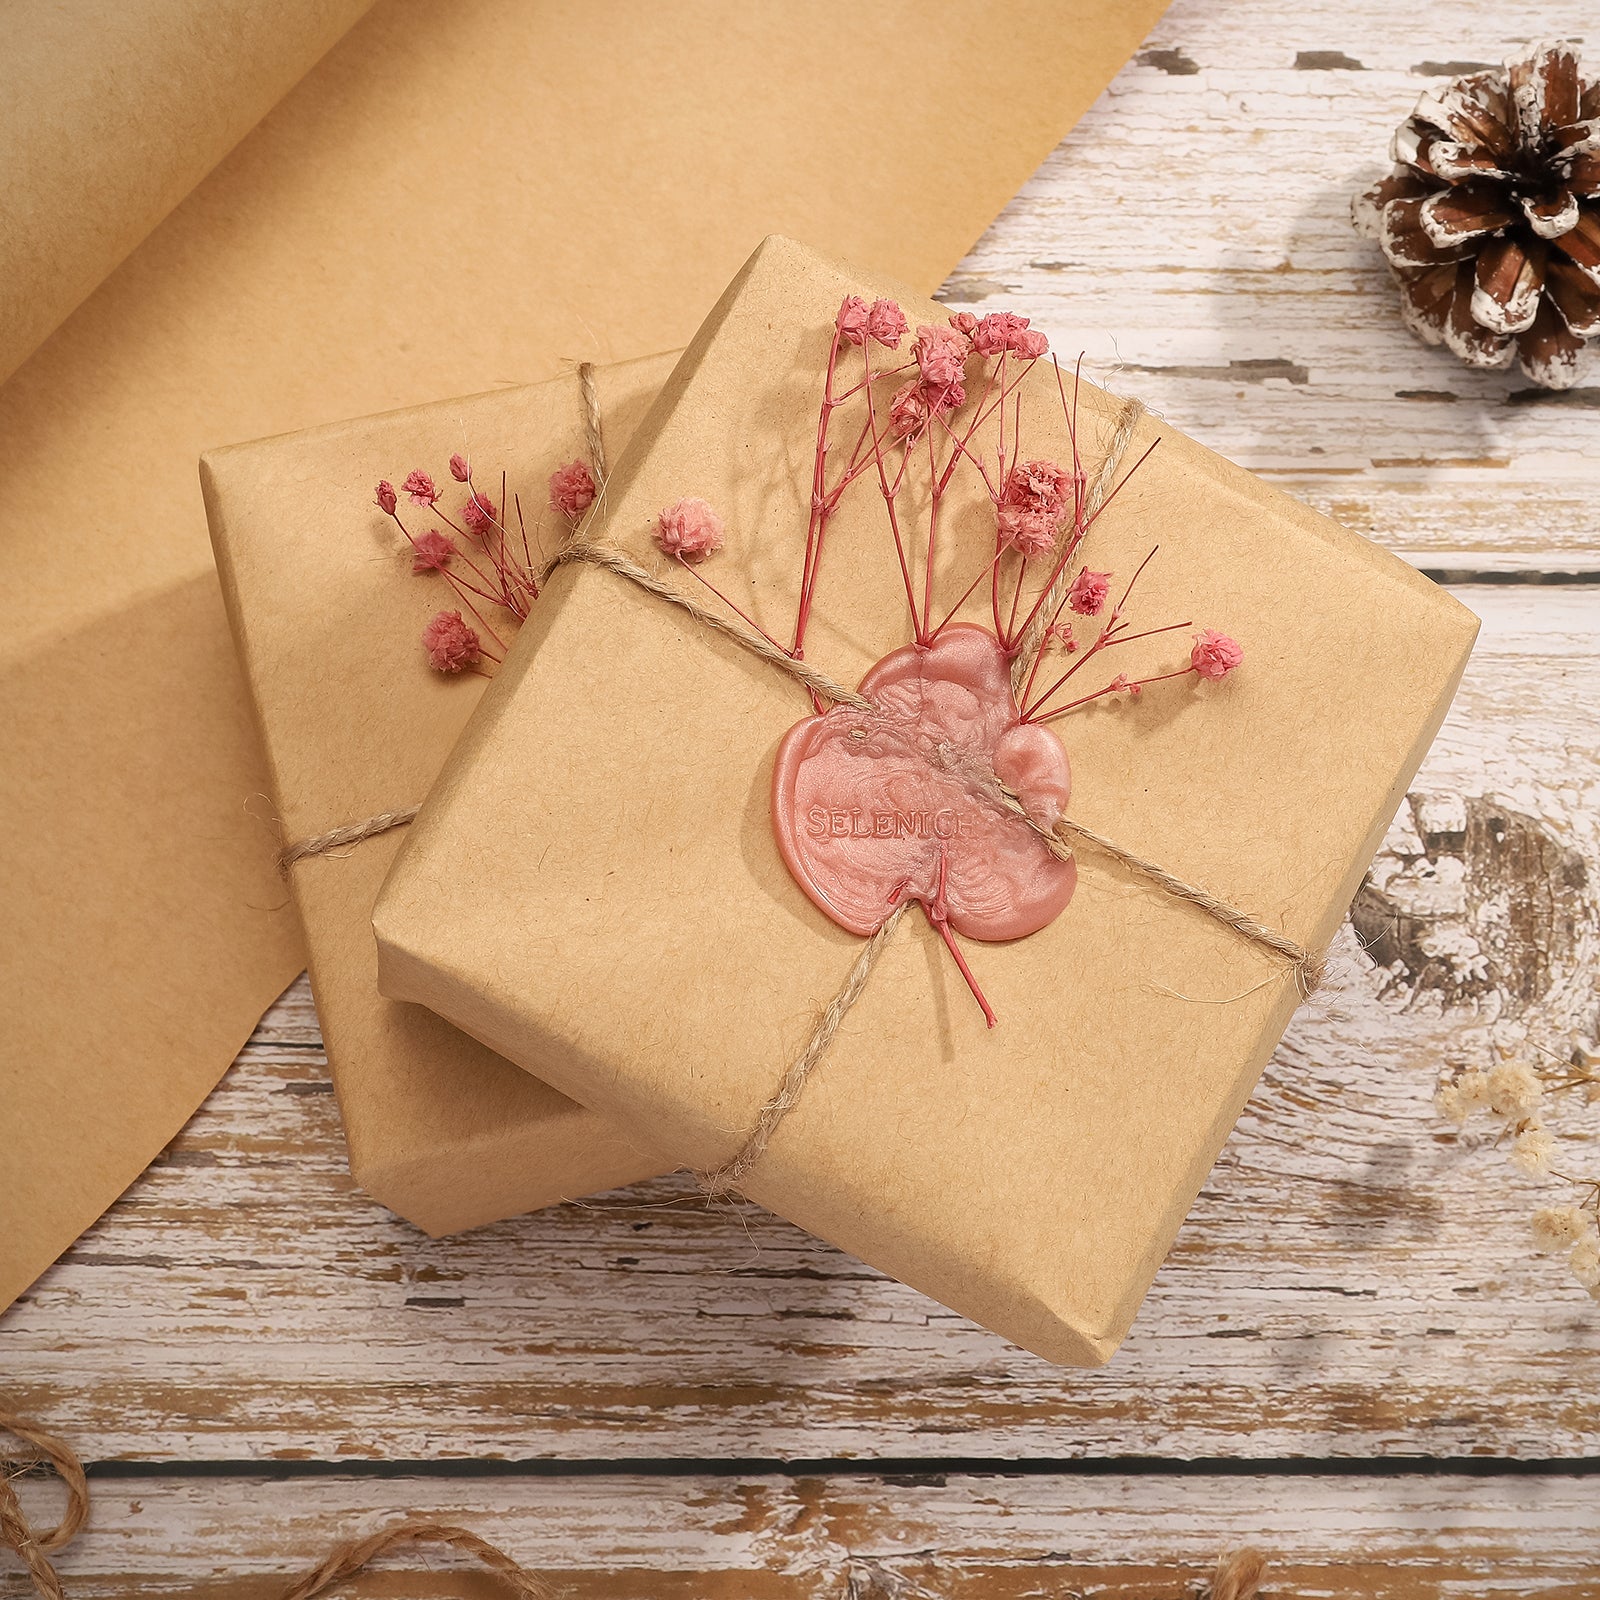 Black Cat Gift Set with Brown Paper Gift Wrapping